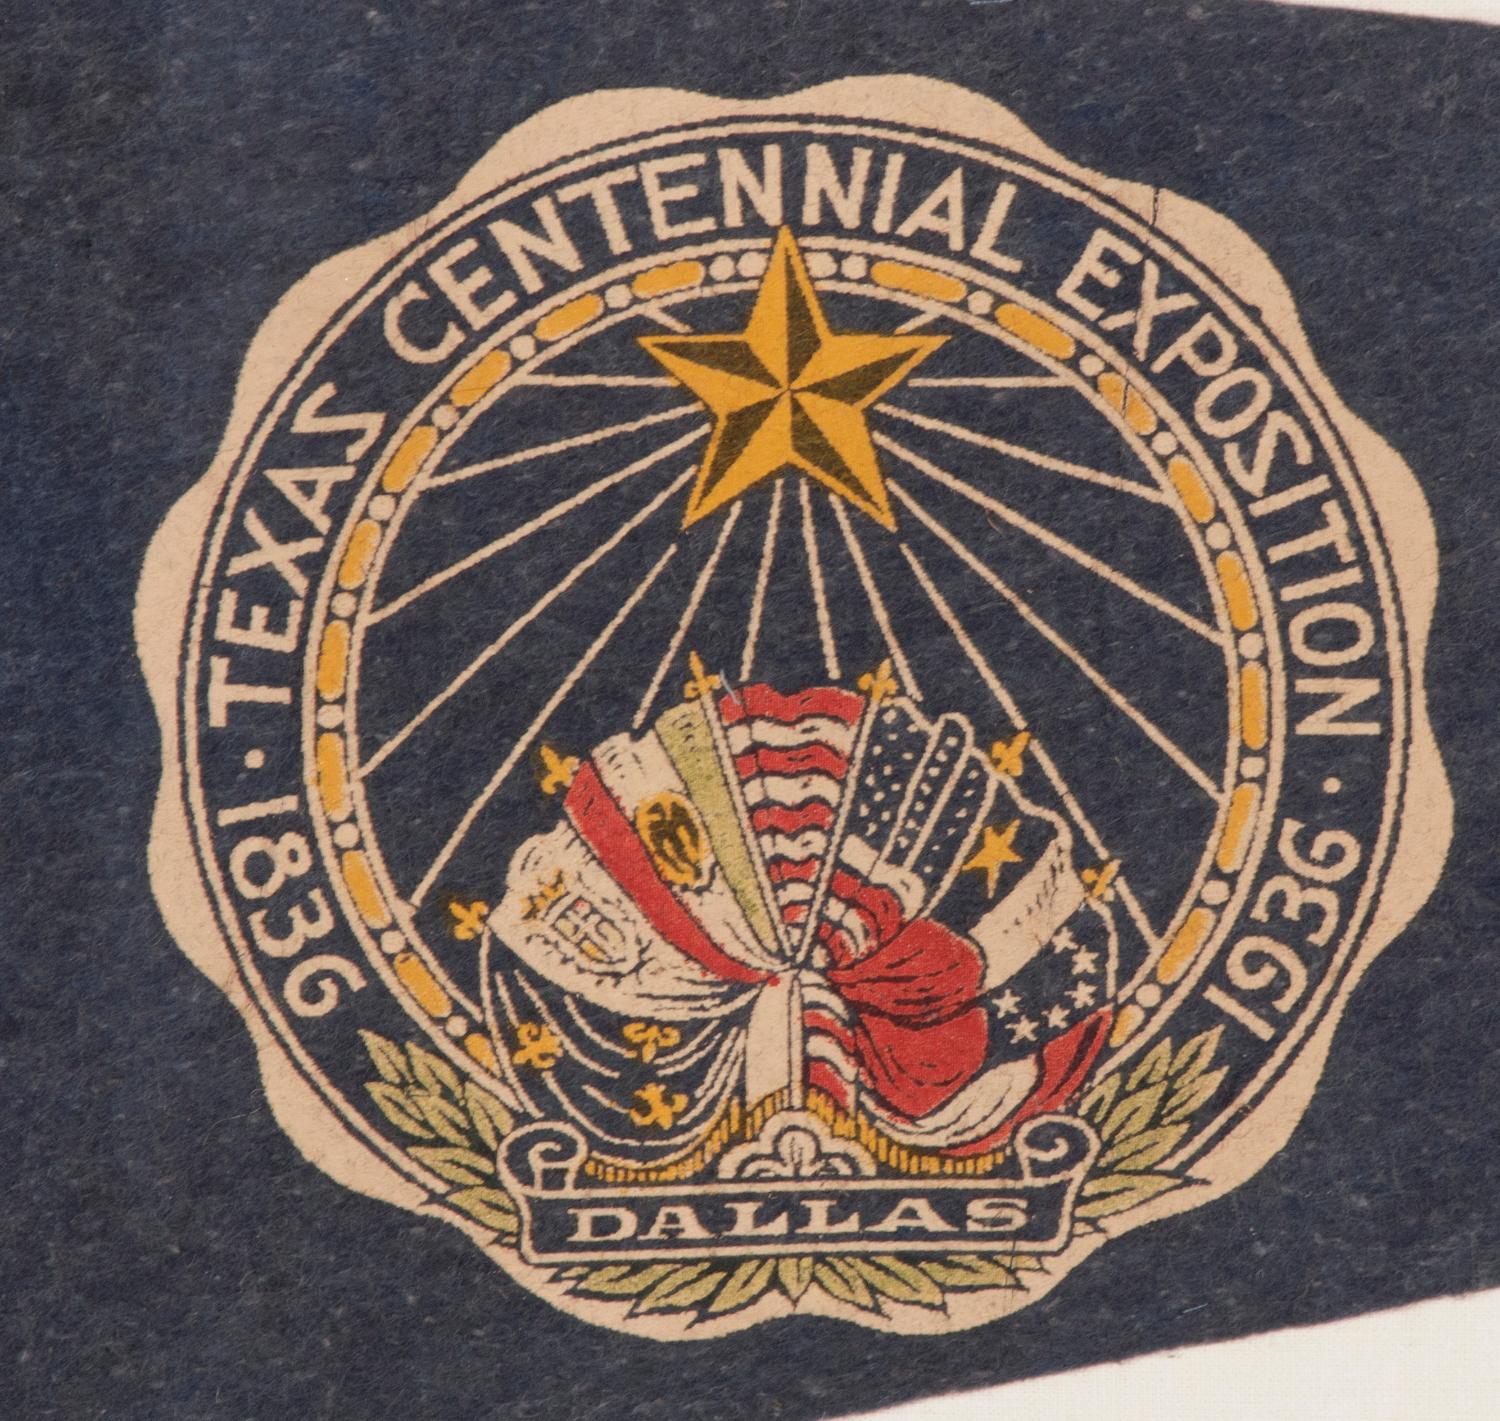 TEXAS CENTENNIAL EXPOSITION PENNANT, CELEBRATING 100-YEARS OF TEXAS INDEPENDENCE FROM MEXICO AND ITS ESTABLISHMENT AS AN INDEPENDENT NATION

While most states celebrate anniversaries of statehood, Texas and Hawaii are the only two that previously